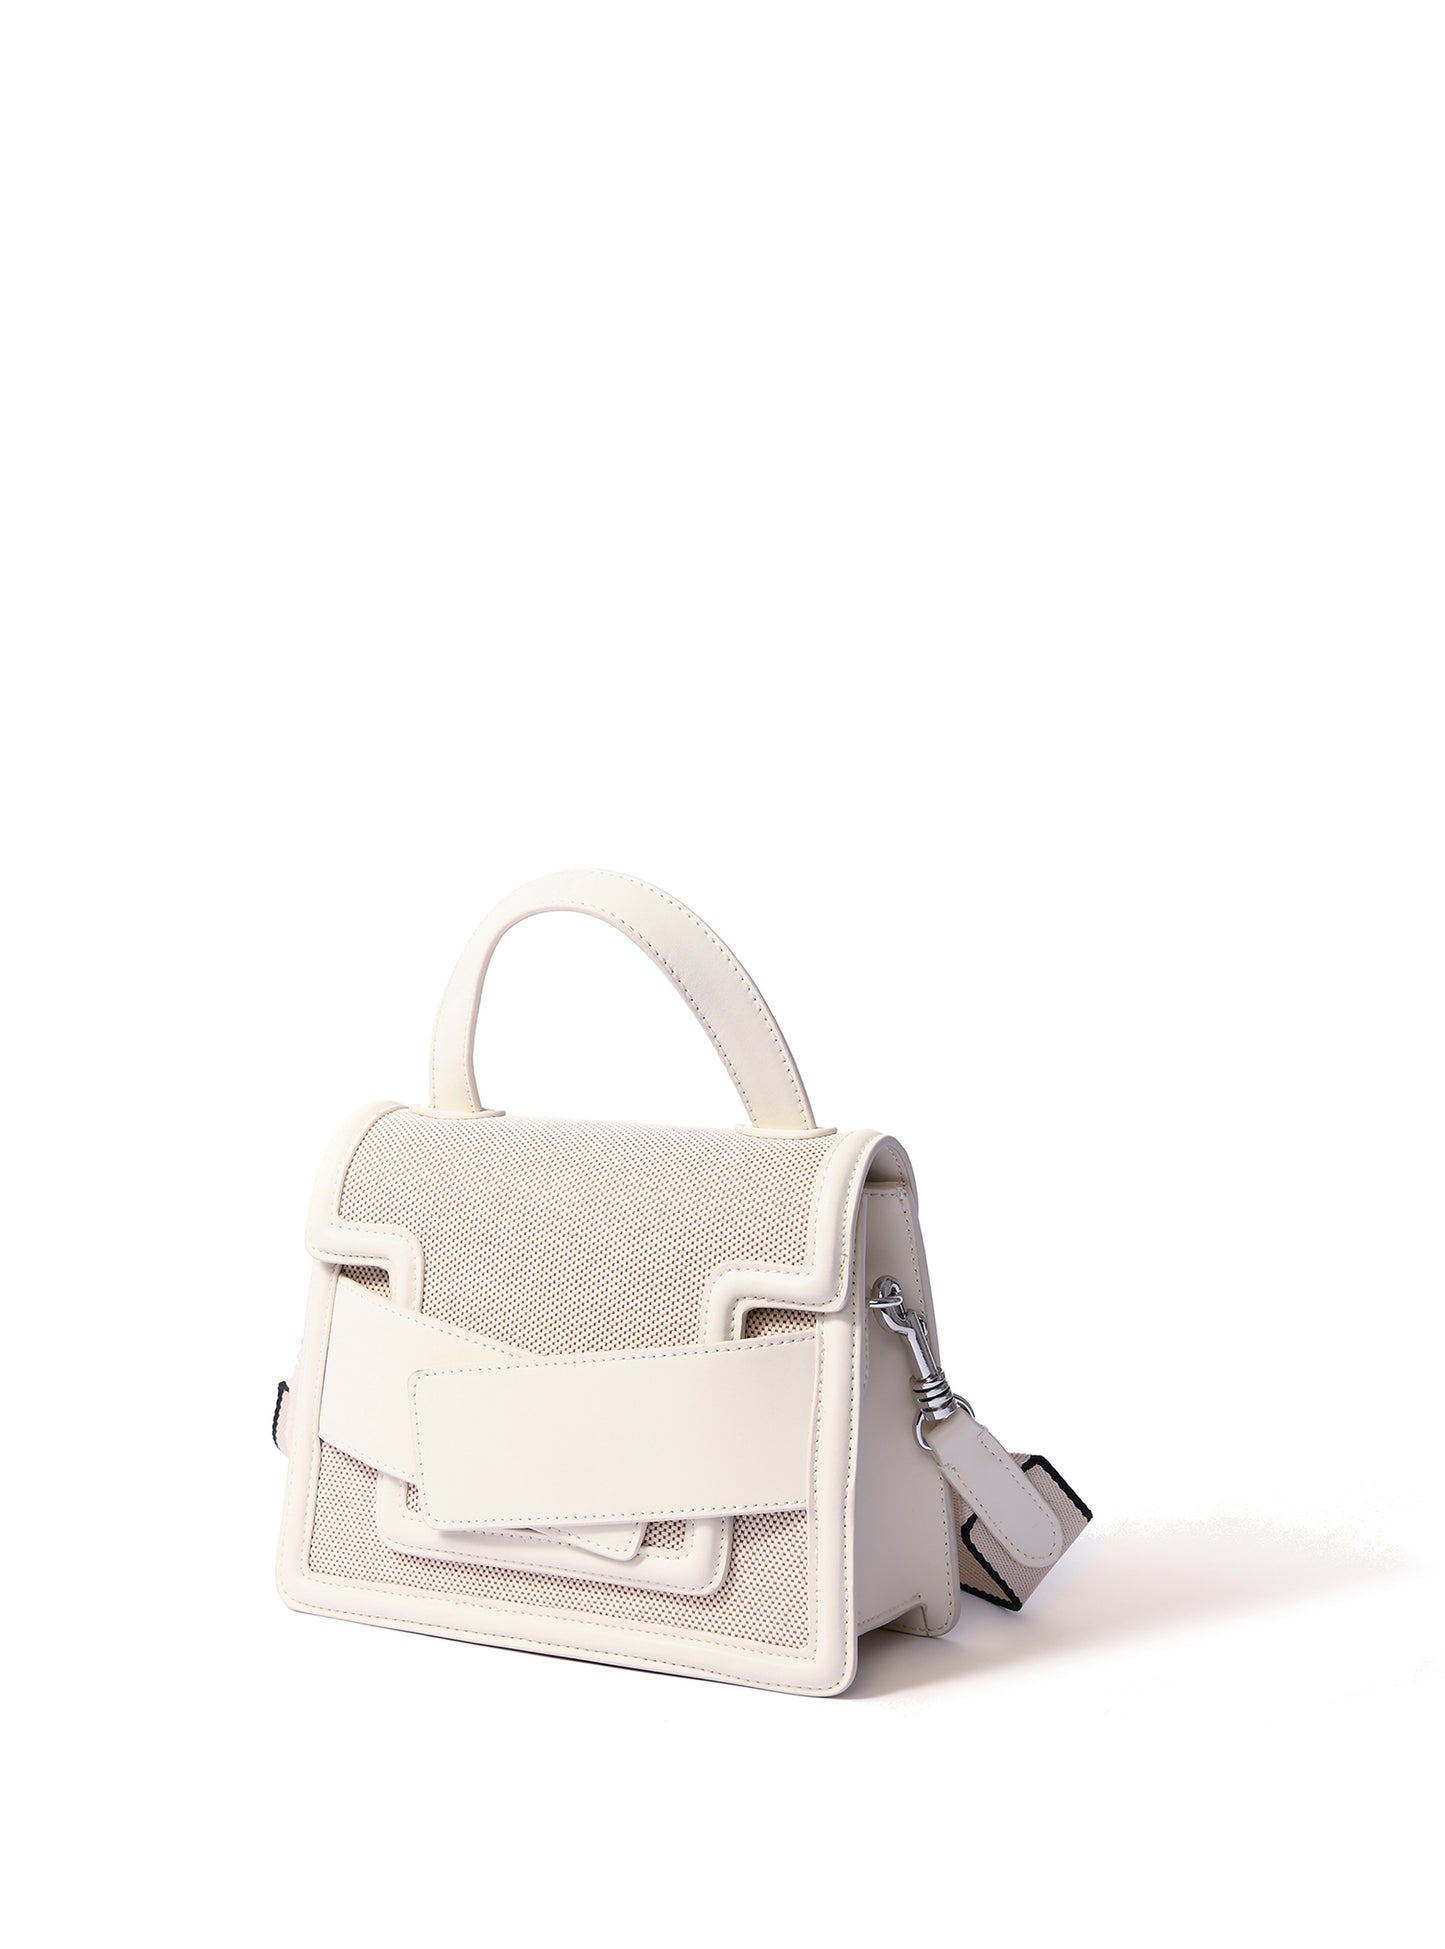 Evelyn Bag in Canvas and Genuine Leather, White